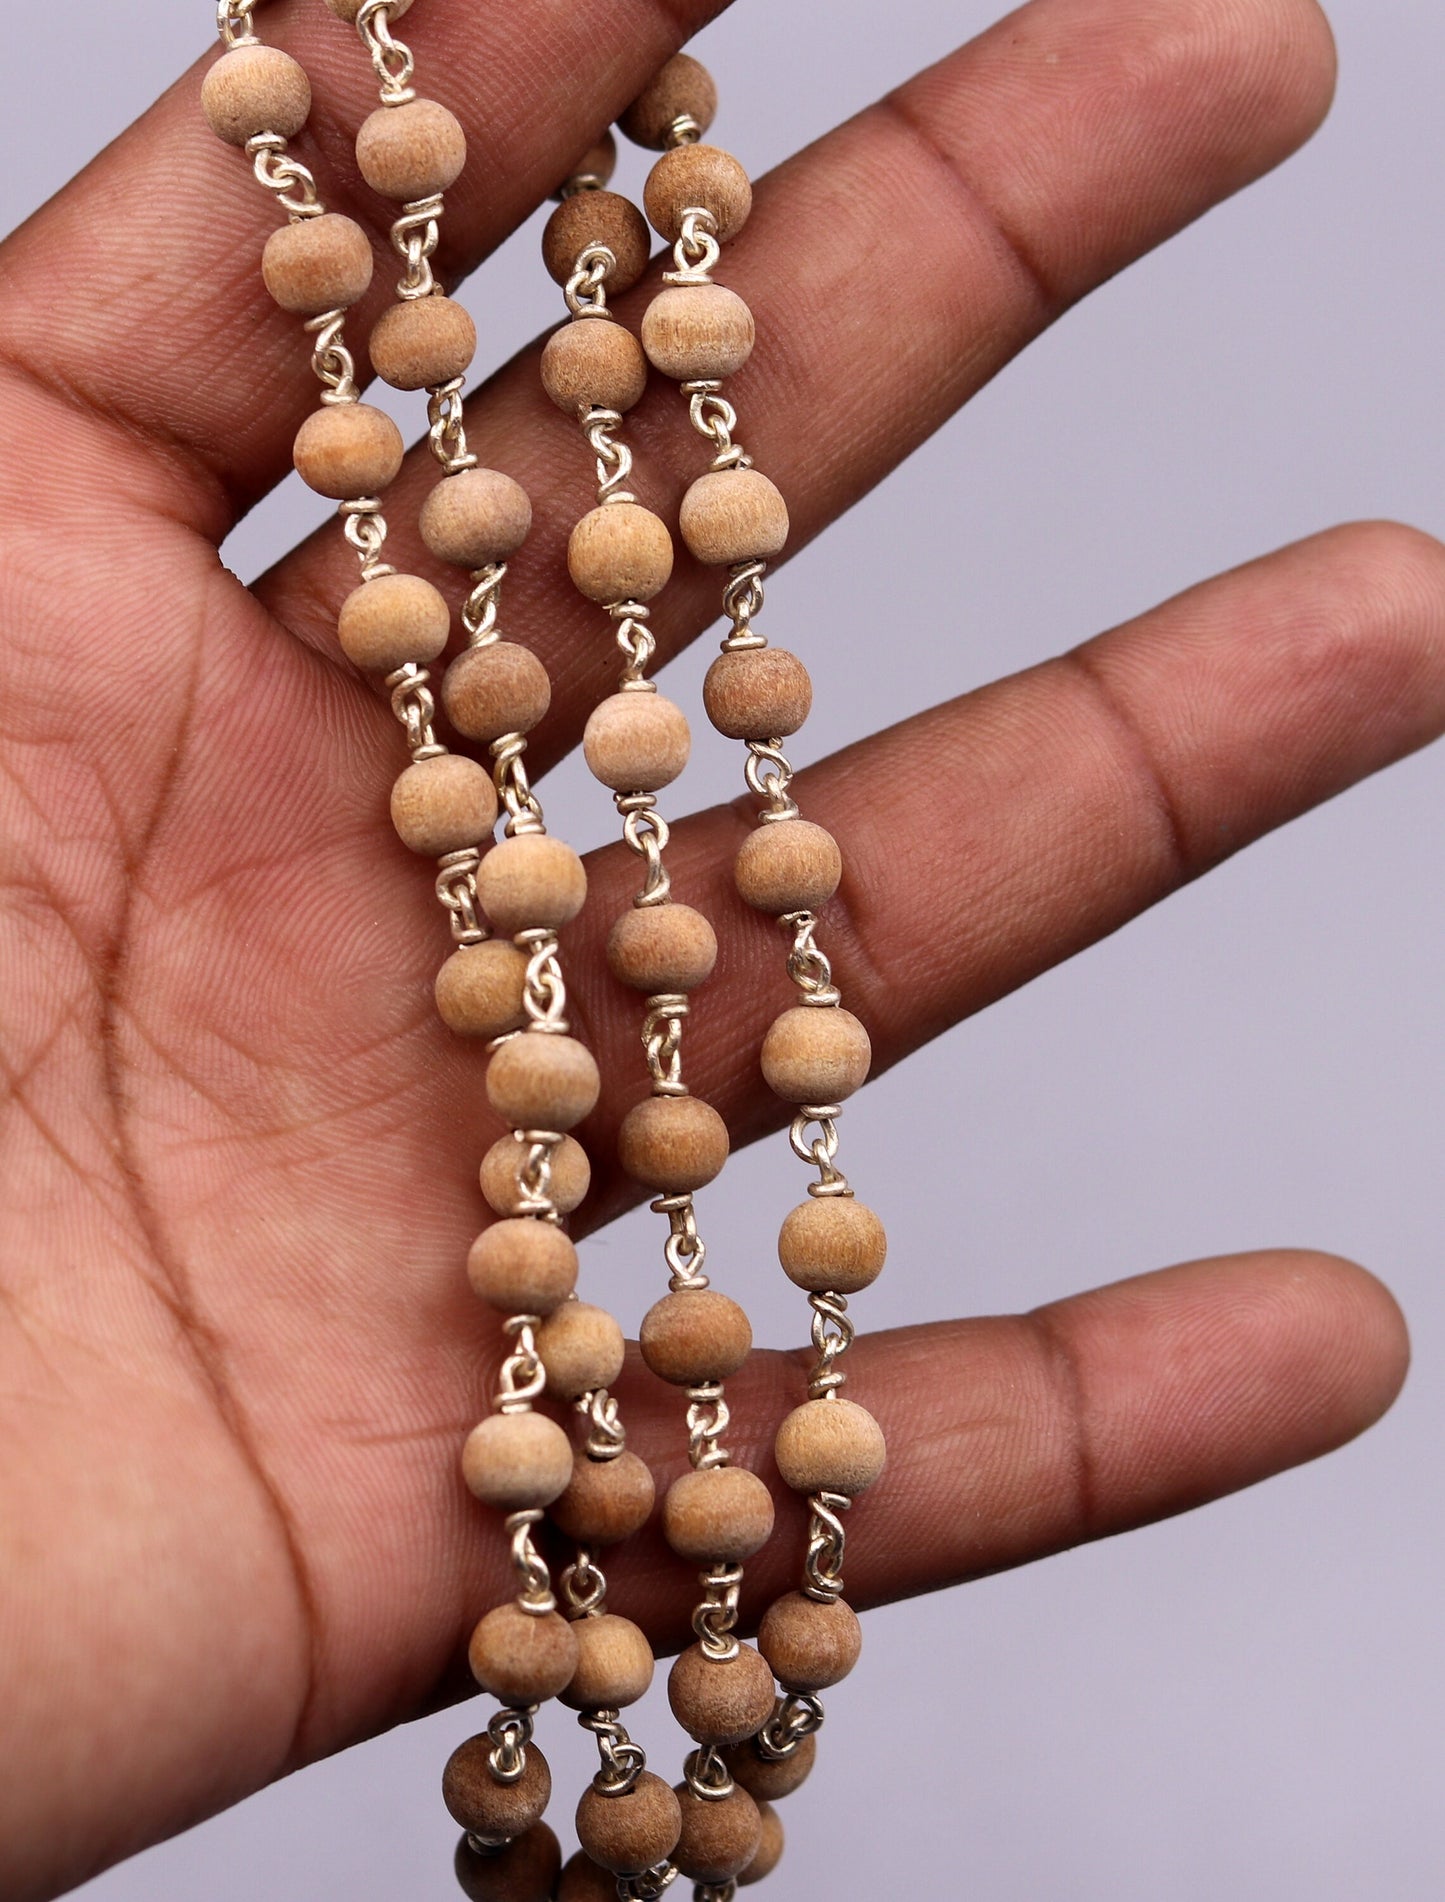 Jaap mala Sandal chandan wood handmade beads 925 solid silver handmade chain necklace to pray god from india ch29 - TRIBAL ORNAMENTS